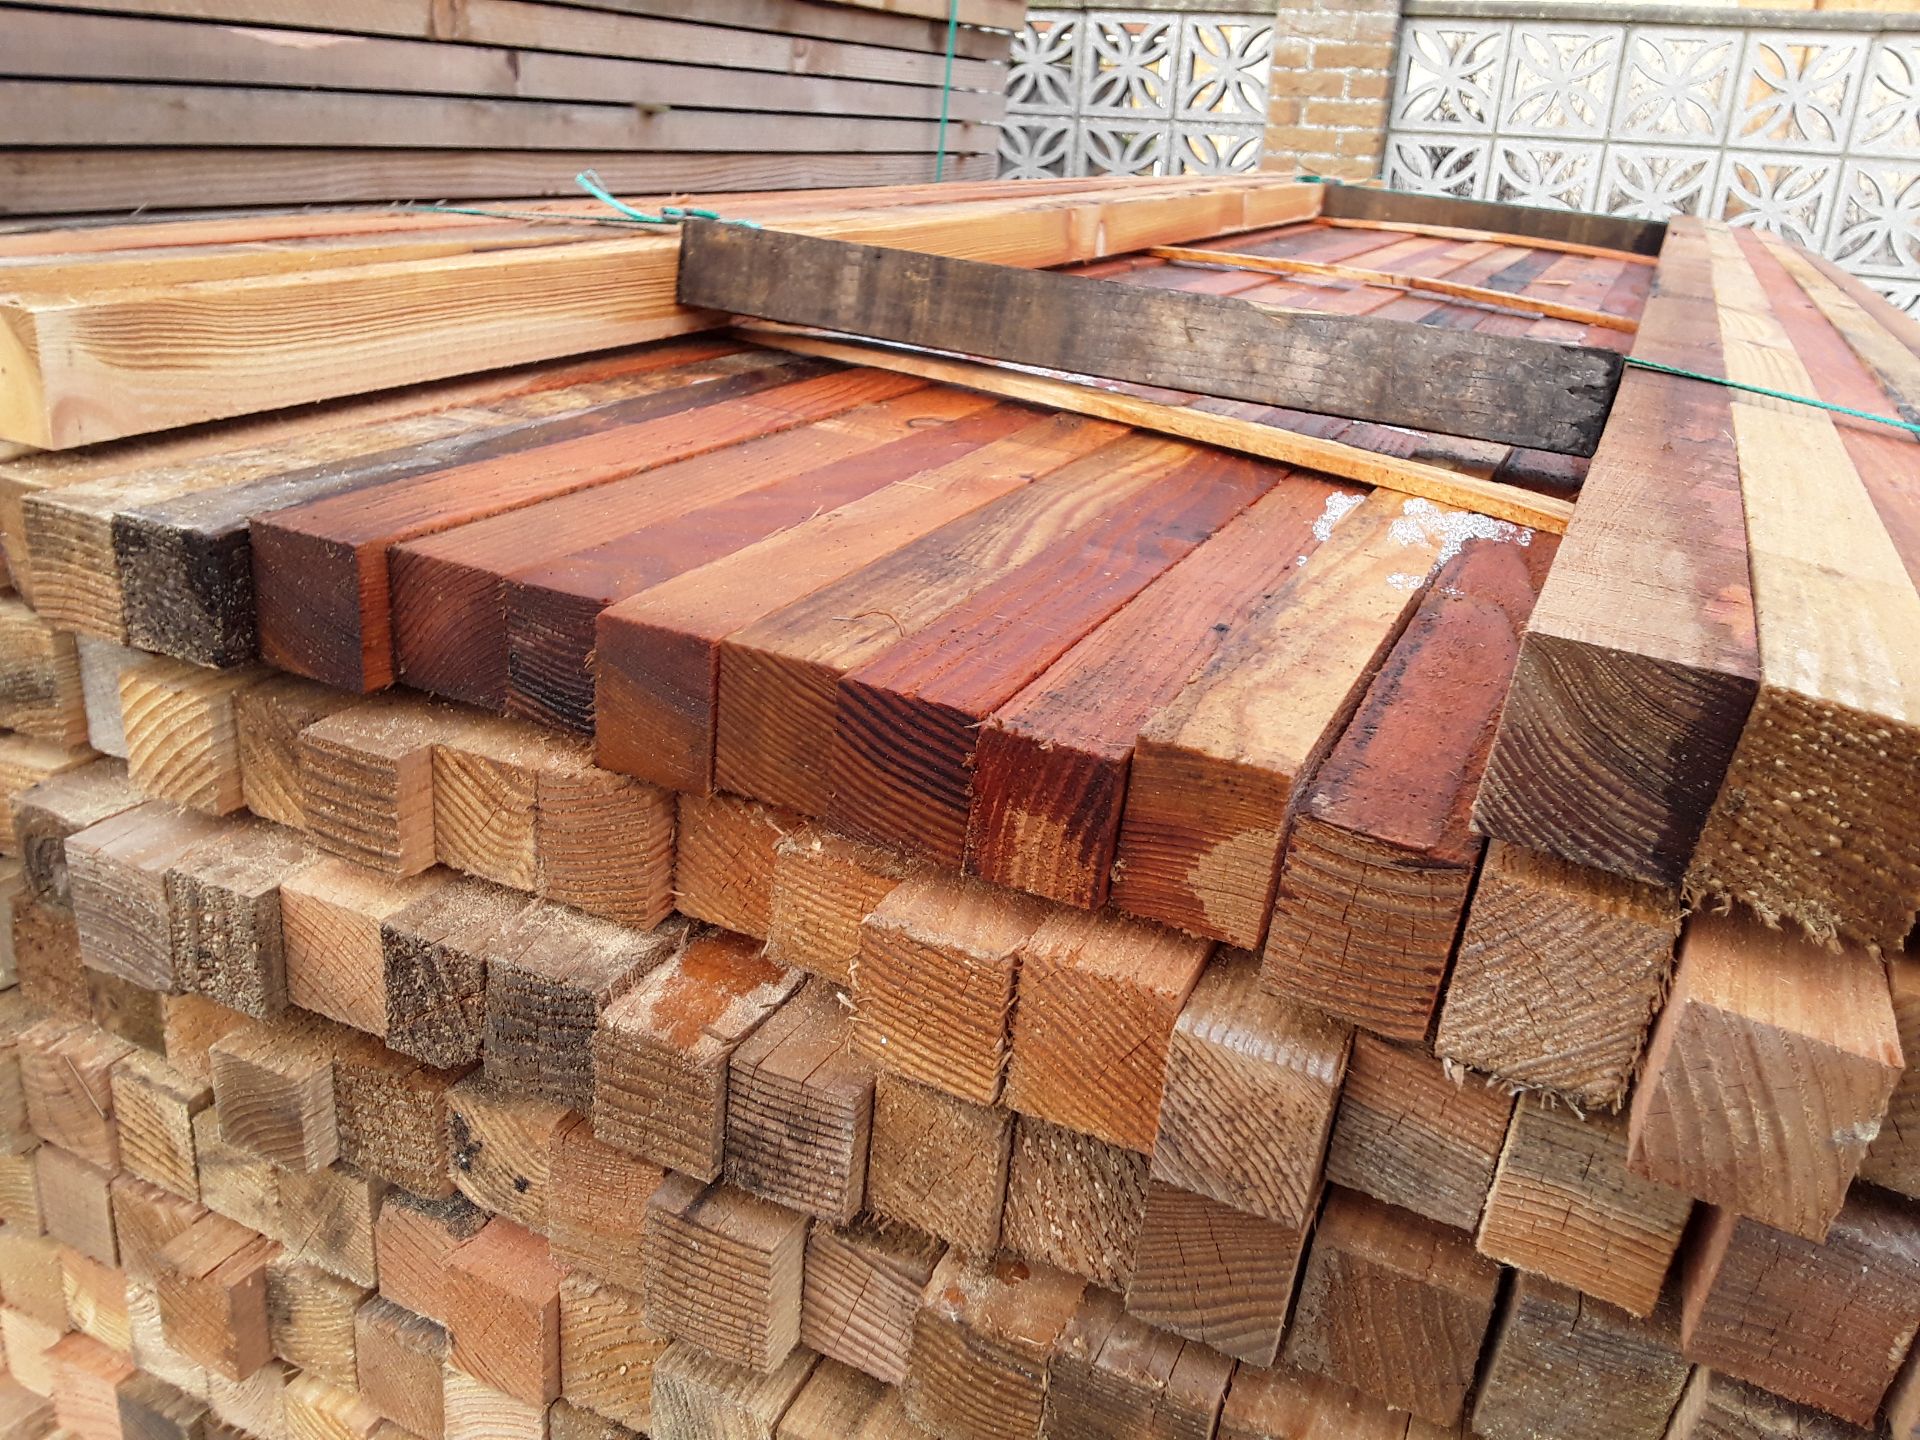 75x Softwood Timber Sawn Larch/ Douglas Fir Offcuts - Image 4 of 4